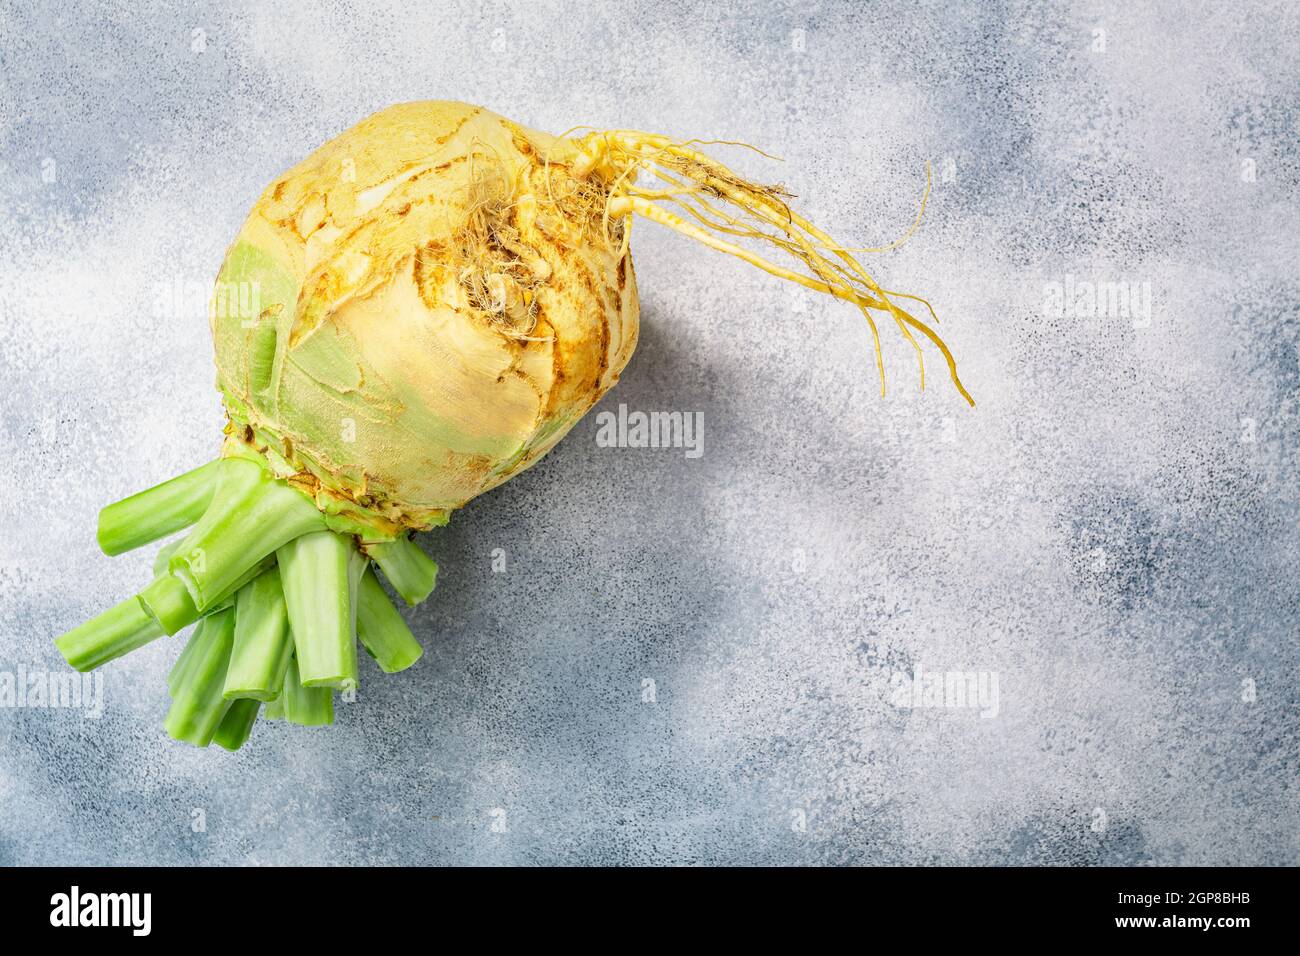 Rutabaga or swede root vegetable atop grey concrete backdrop, top view Stock Photo